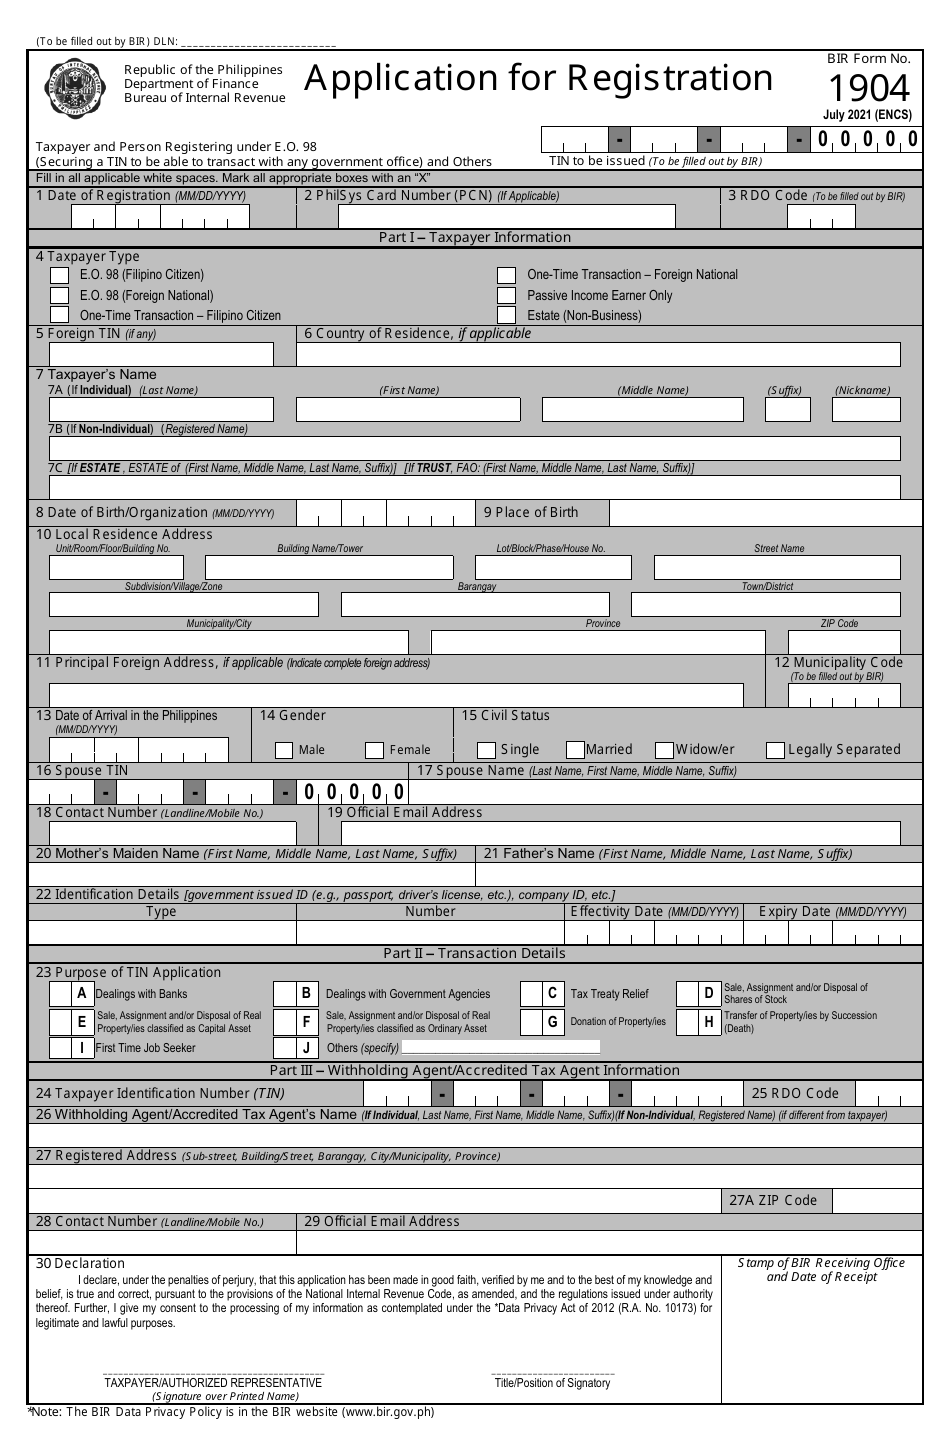 BIR Form 1904 Application for Registration - Philippines, Page 1